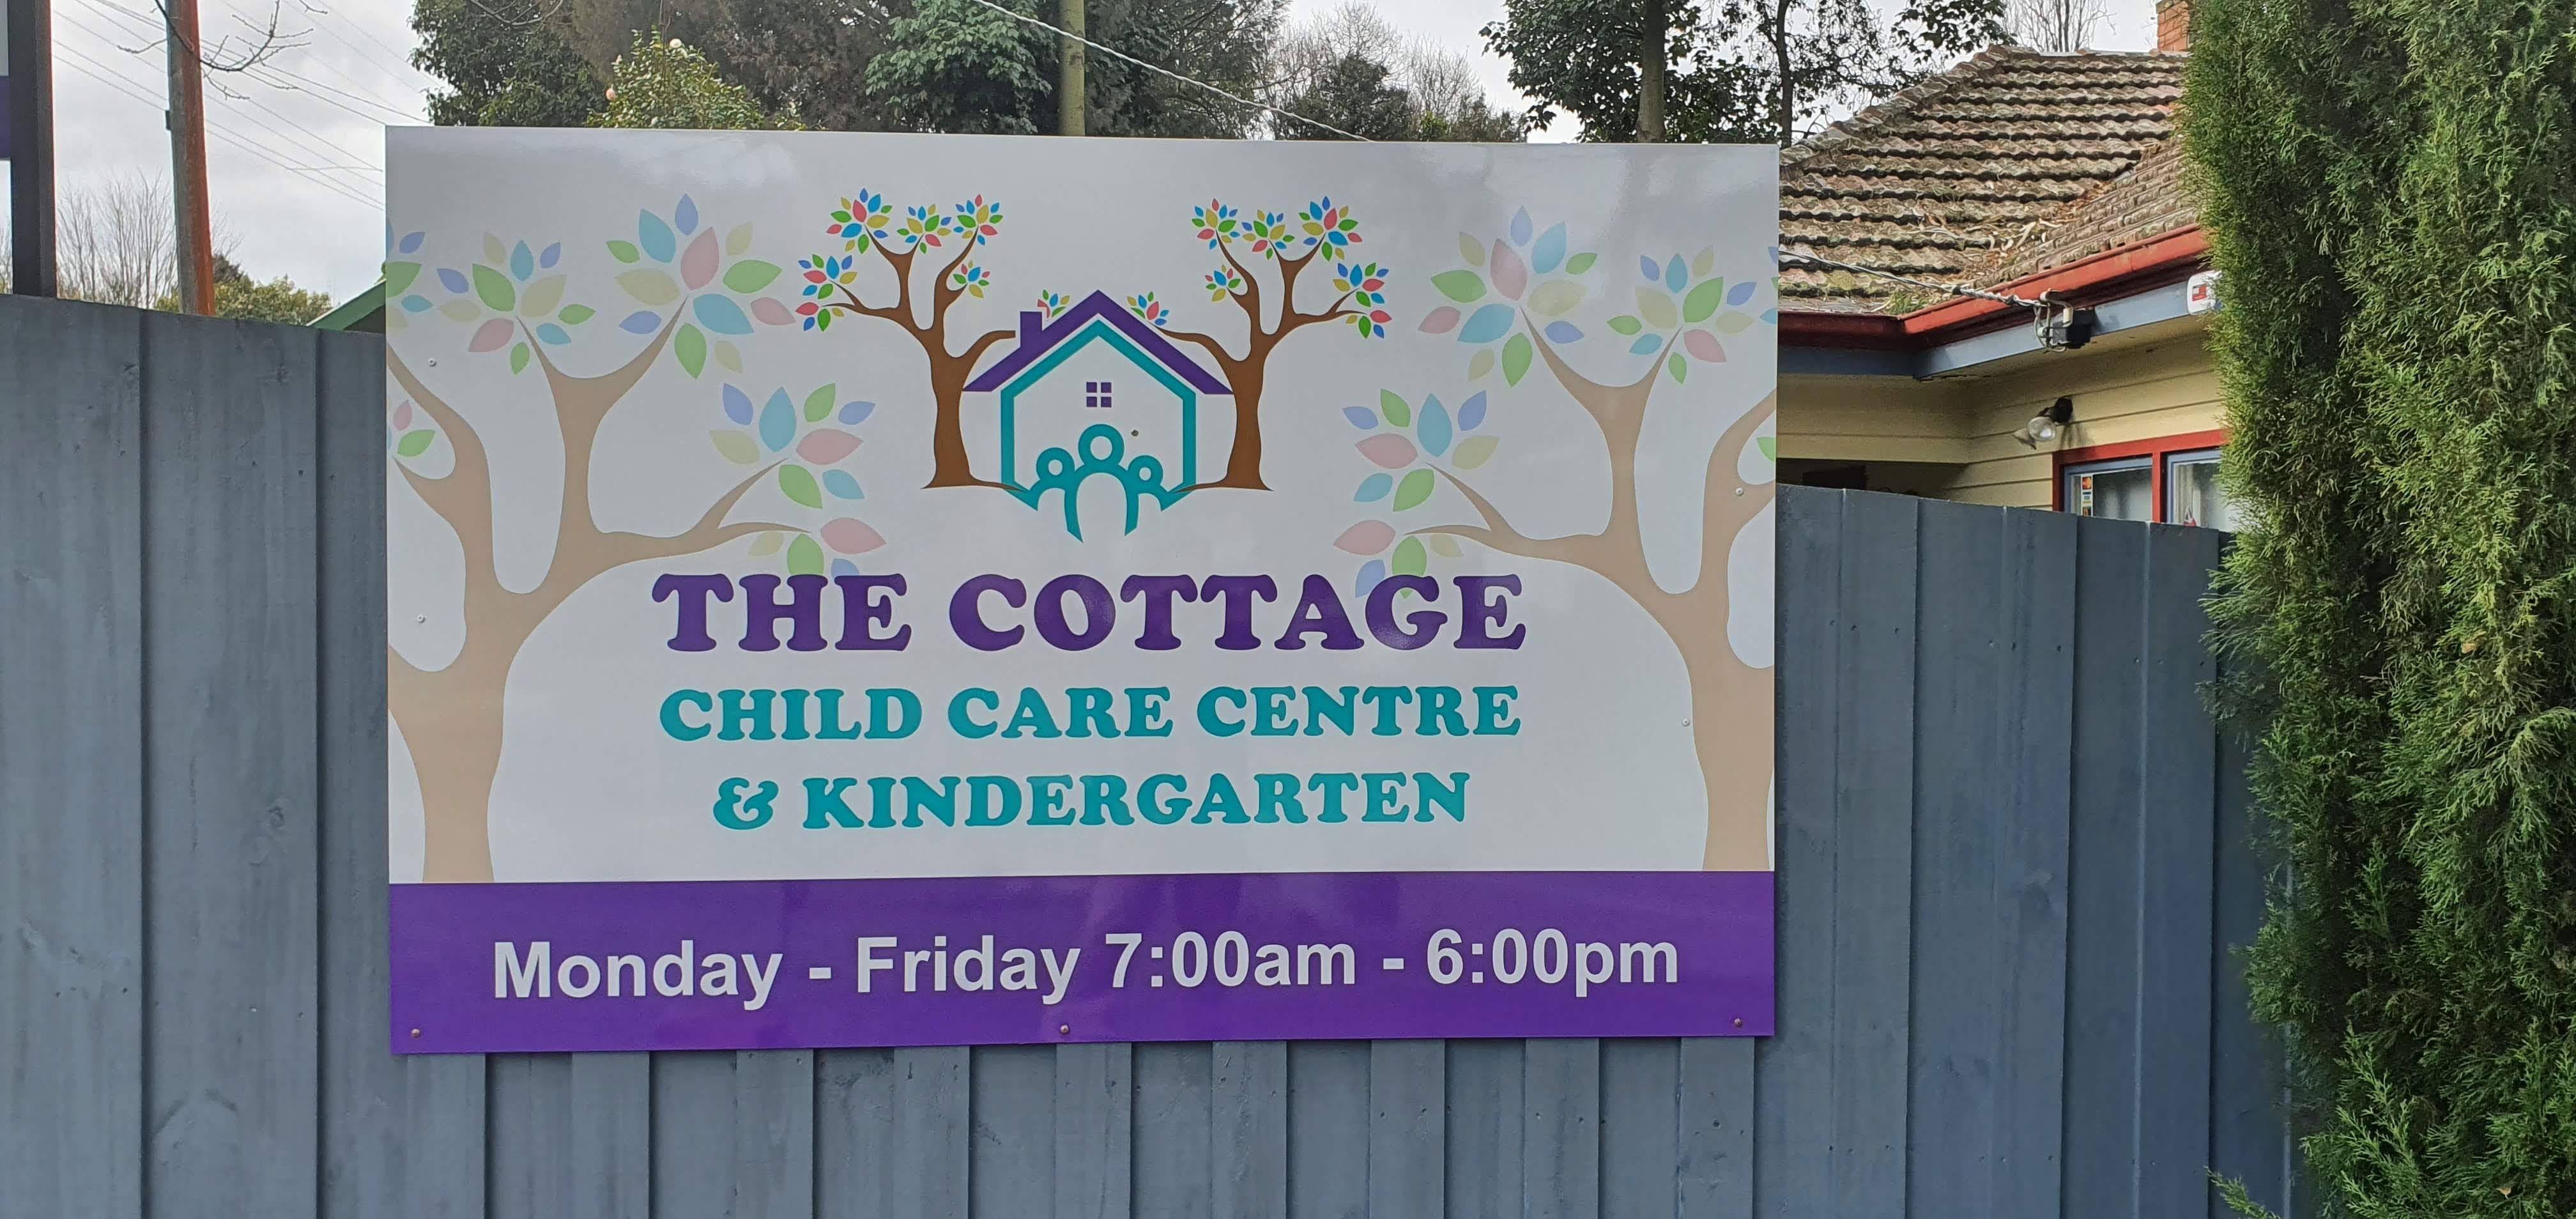 The Cottage Childcare Centre and Kindergarten